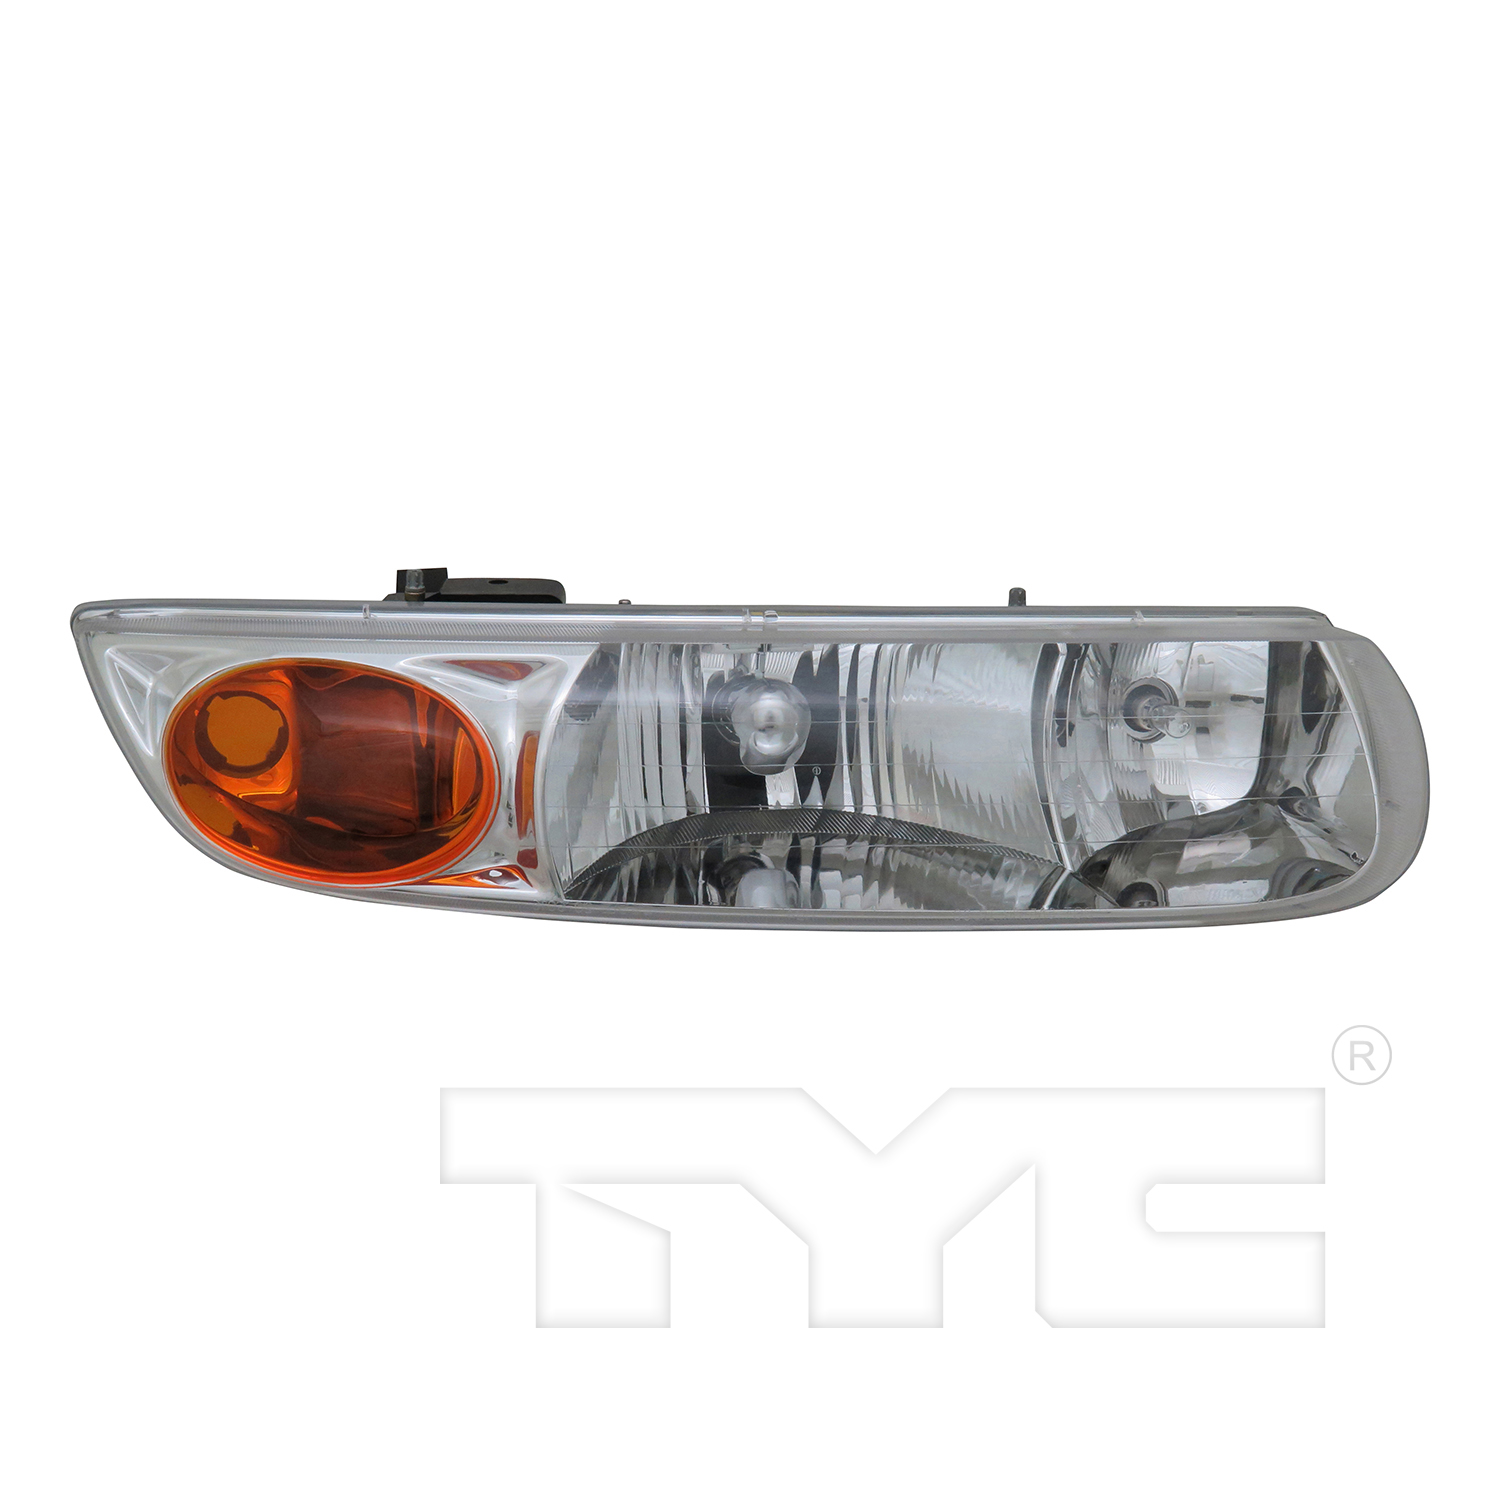 Aftermarket HEADLIGHTS for SATURN - SW2, SW2,00-01,RT Headlamp assy composite